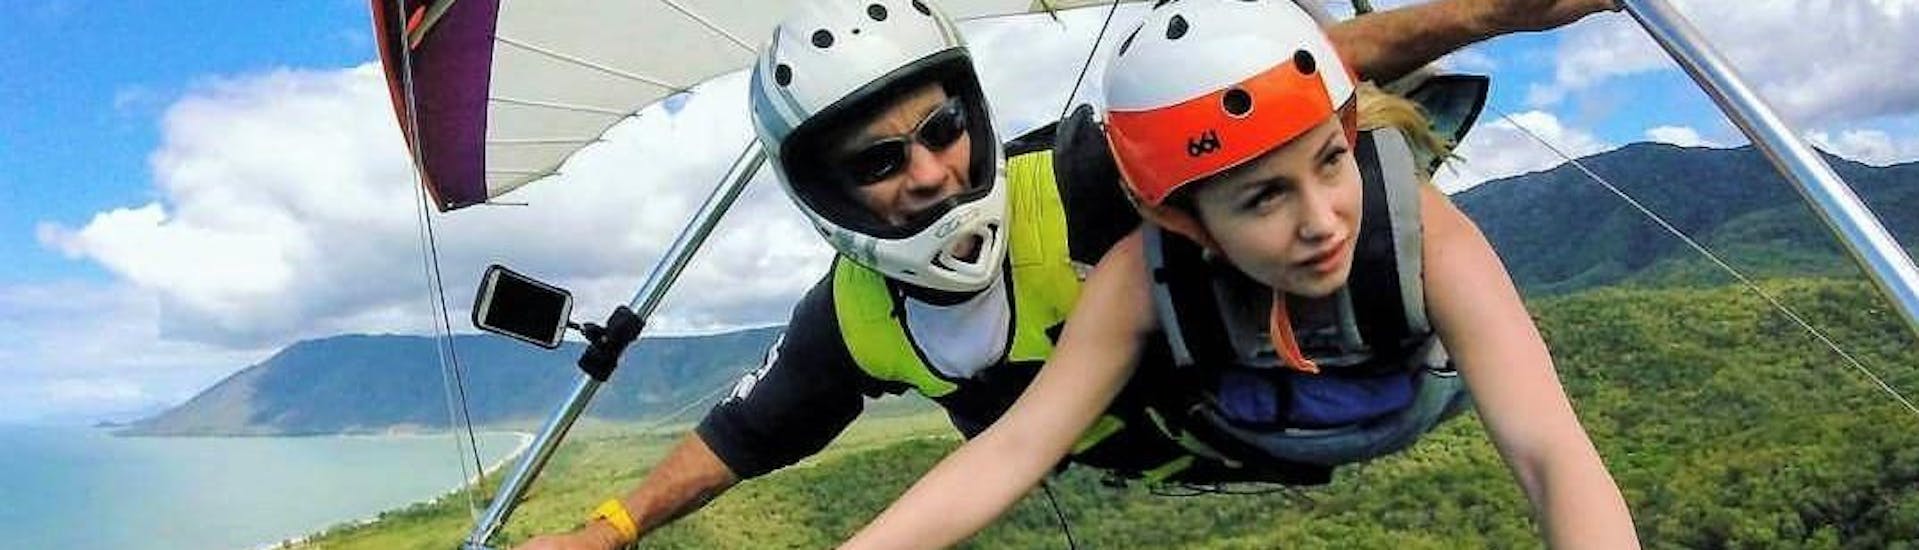 hang-gliding-in-cairns-air-play-hang-gliding-cairns-hero